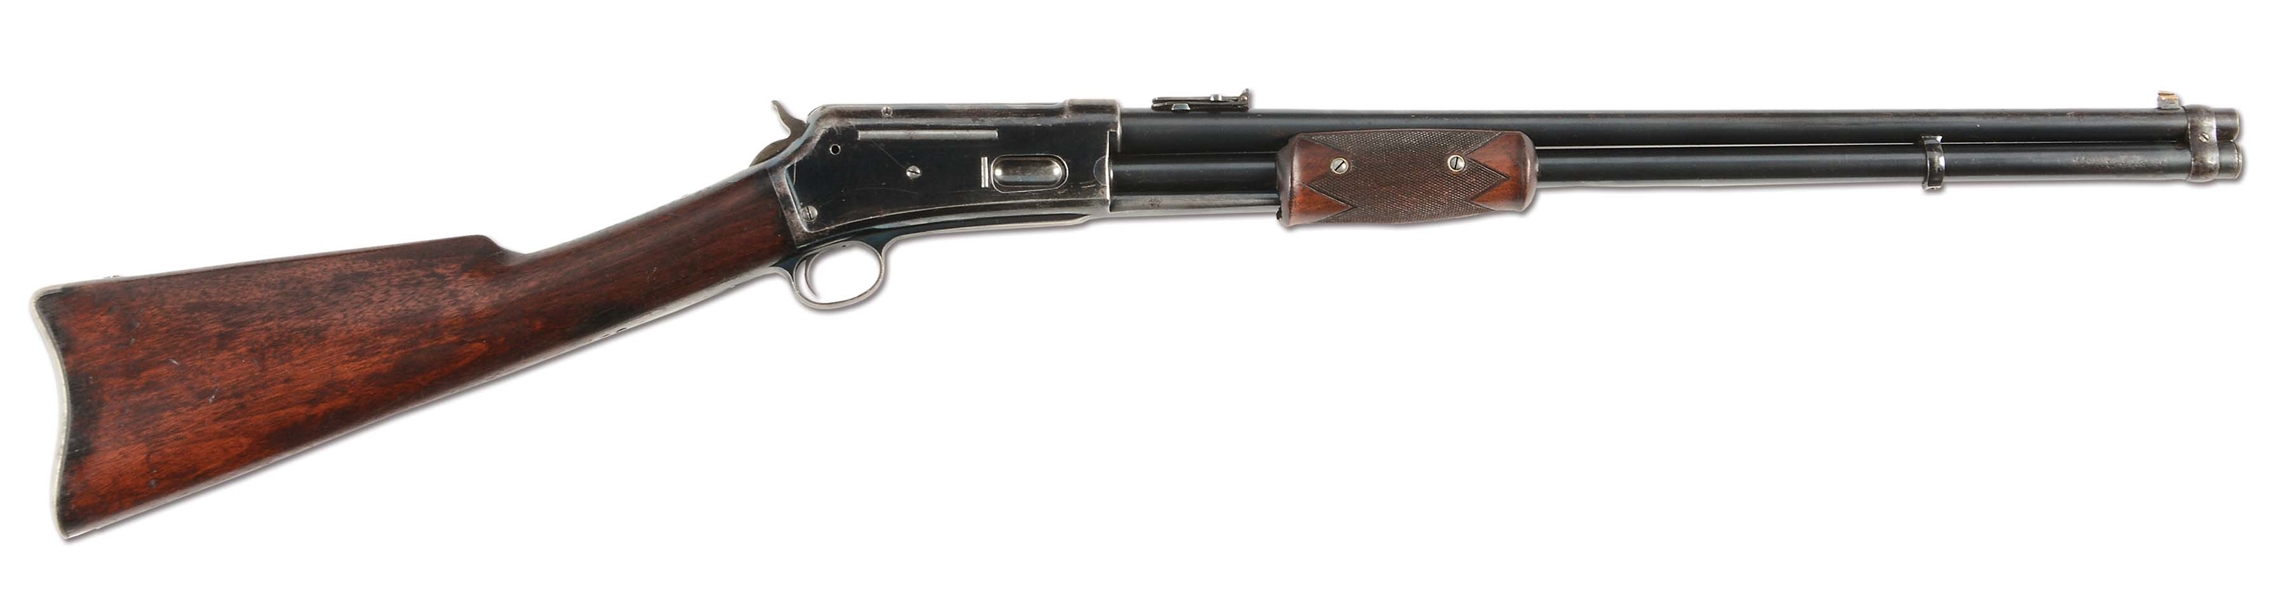 (A) SPECTACULAR 1ST YEAR PRODUCTION COLT LIGHTNING LARGE FRAME BABY CARBINE (1887).